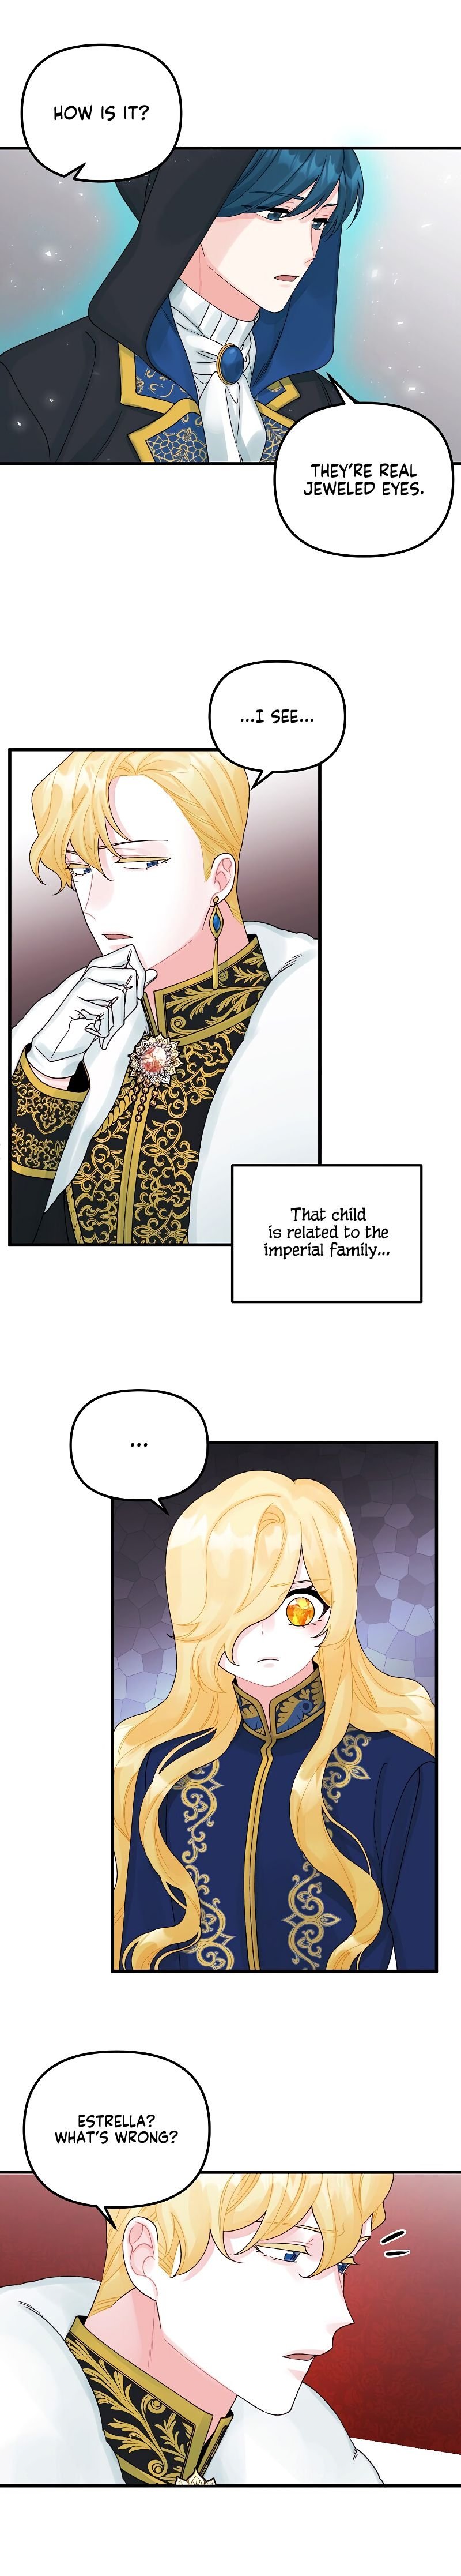 the-princess-in-the-dumpster-chap-37-11